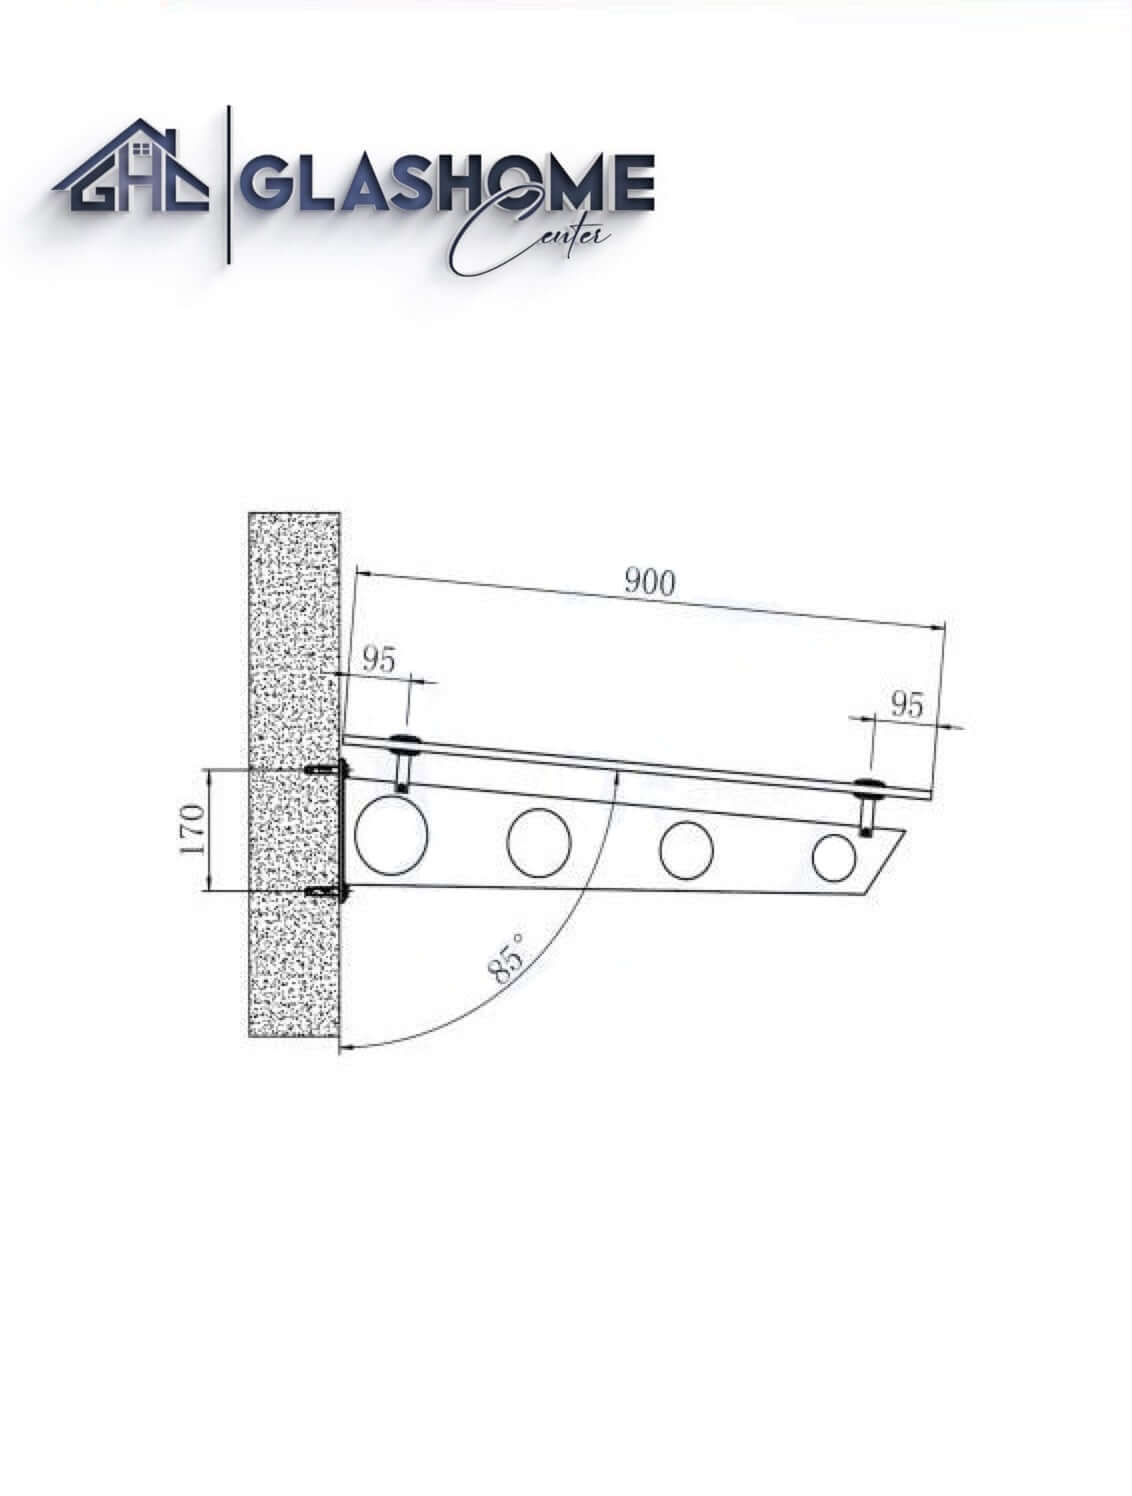 GlasHomeCenter - glass canopy - gray glass - 150x90cm - 13.1mm laminated safety glass - incl. 2 stainless steel brackets variant "Stockholm"